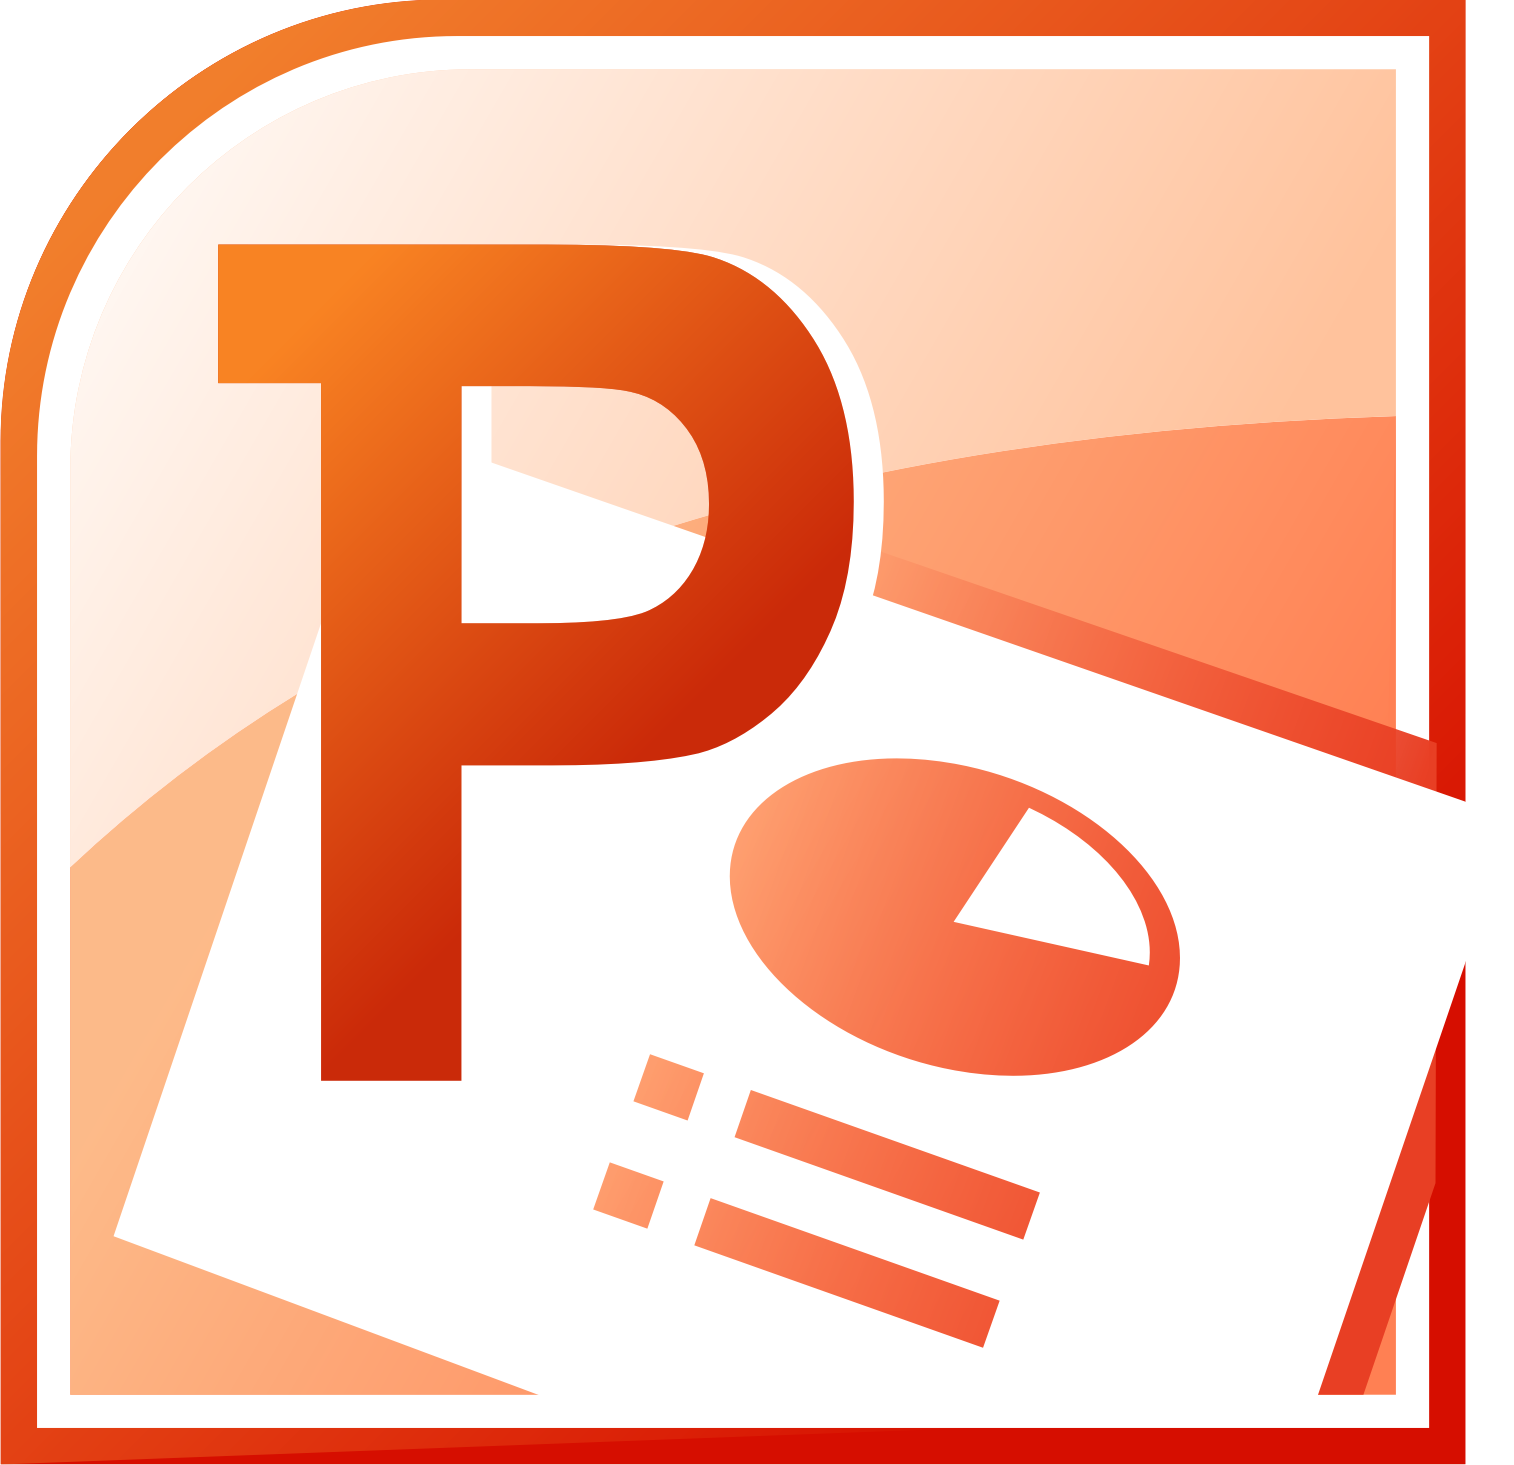 microsoft powerpoint 2010 free download full version